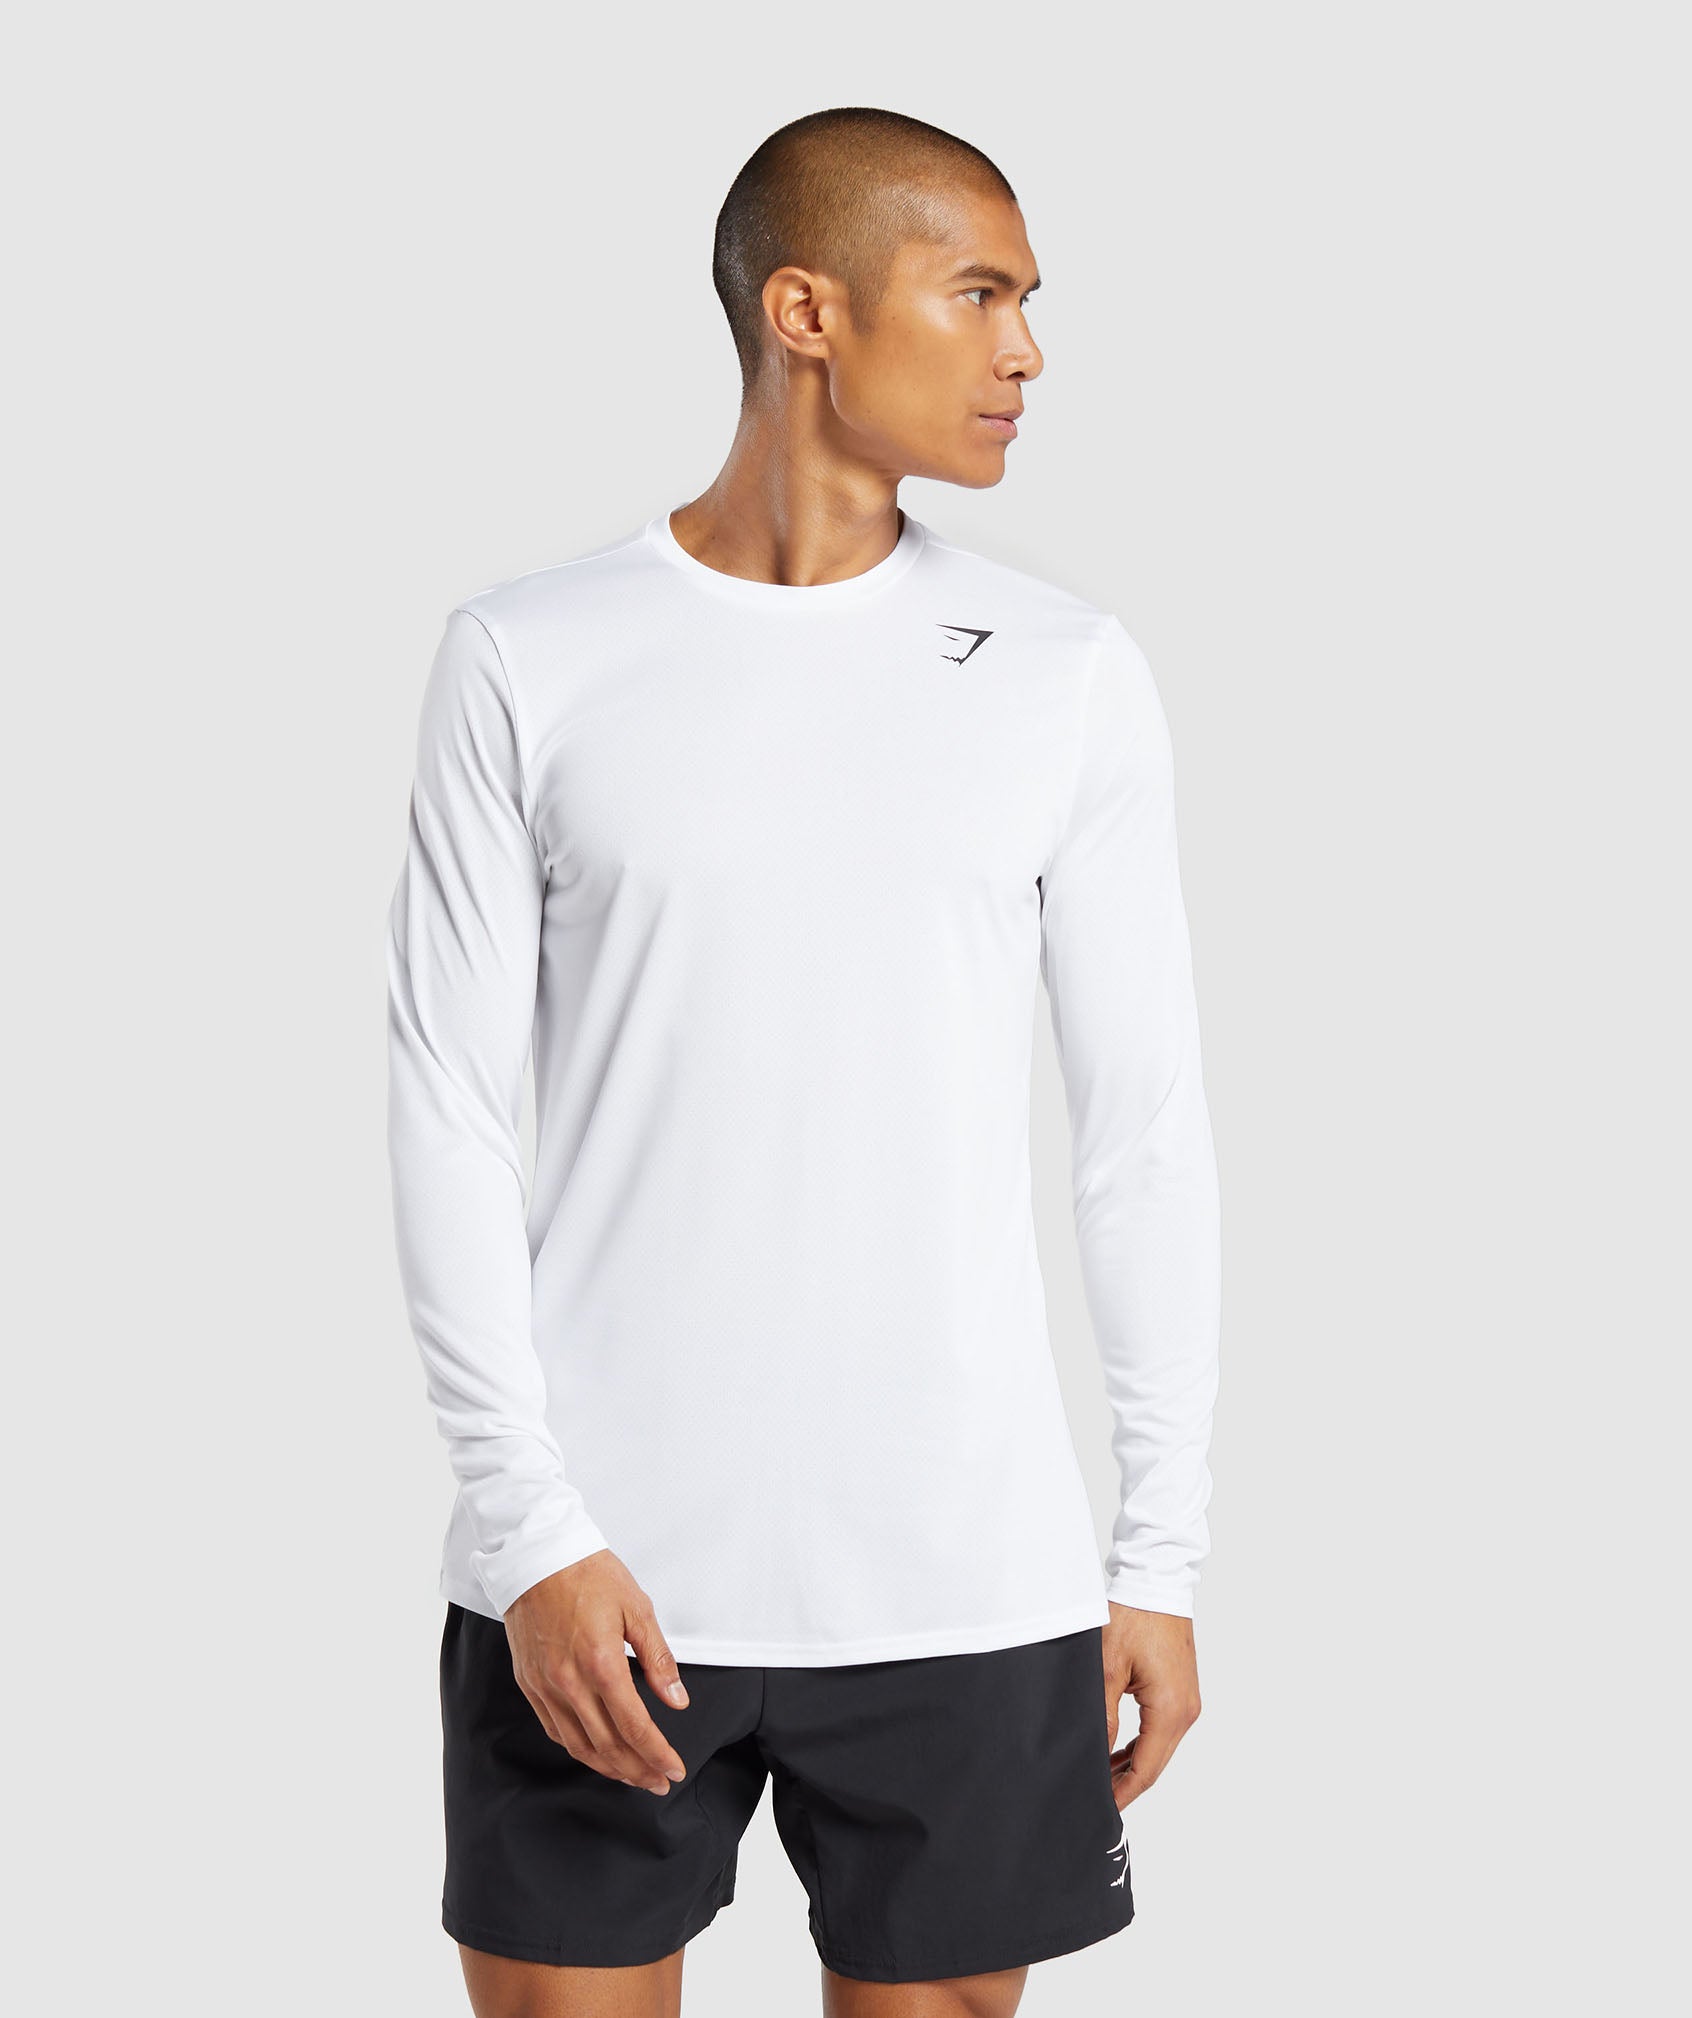 Arrival Long Sleeve T-Shirt in White